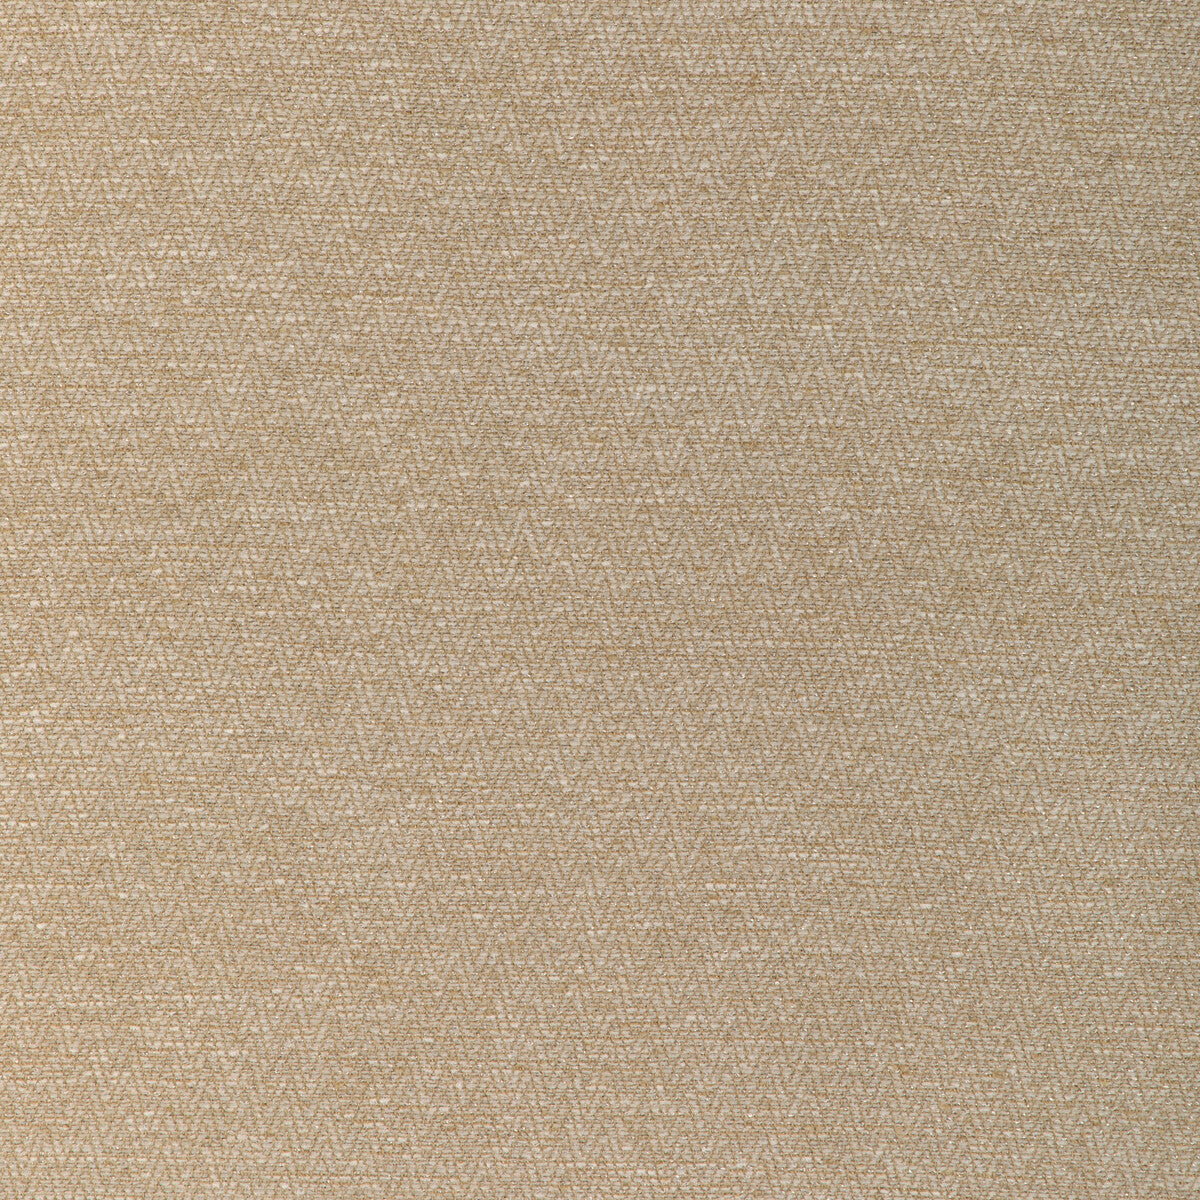 Beauvoir Texture fabric in cream color - pattern 8023153.16.0 - by Brunschwig &amp; Fils in the Chambery Textures IV collection